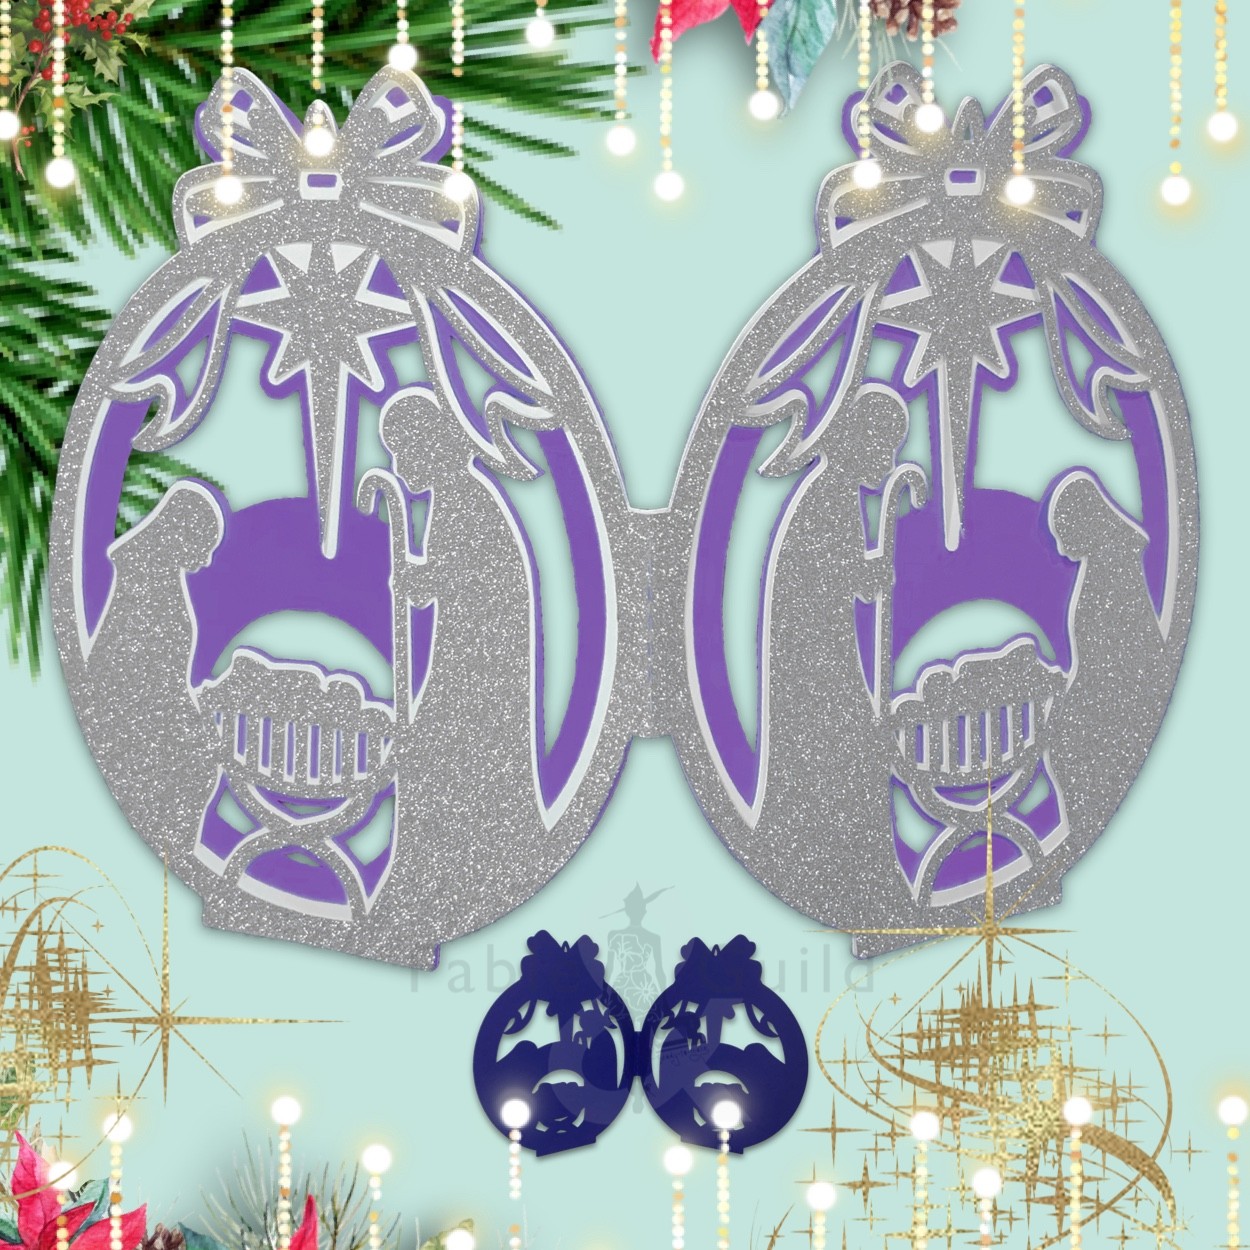 Download The Nativity Bauble Christmas Card Fable Guild SVG Cut Files